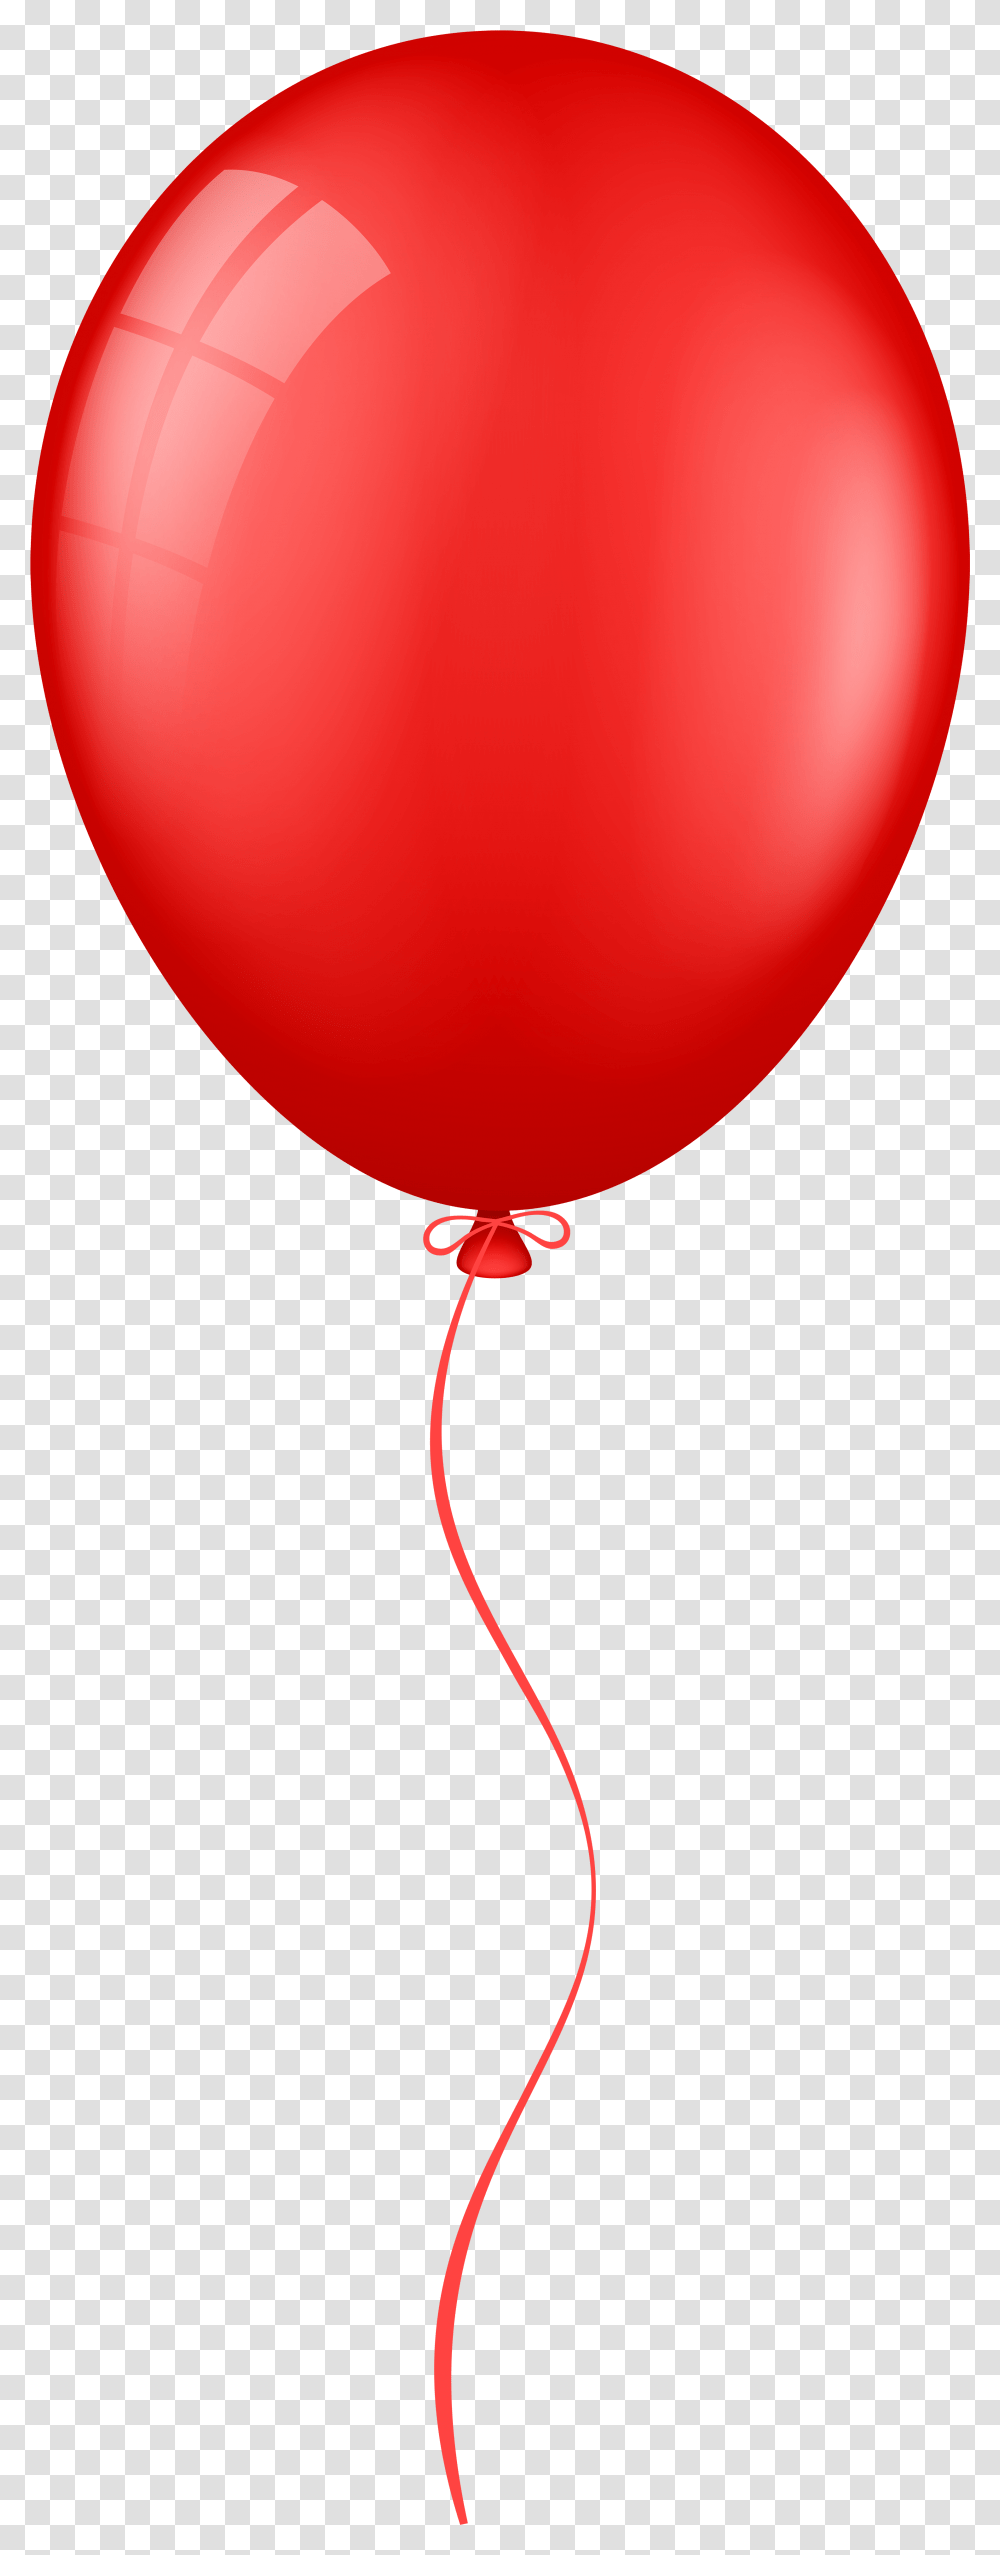 Red Balloons Background Balloon Clip Art Transparent Png